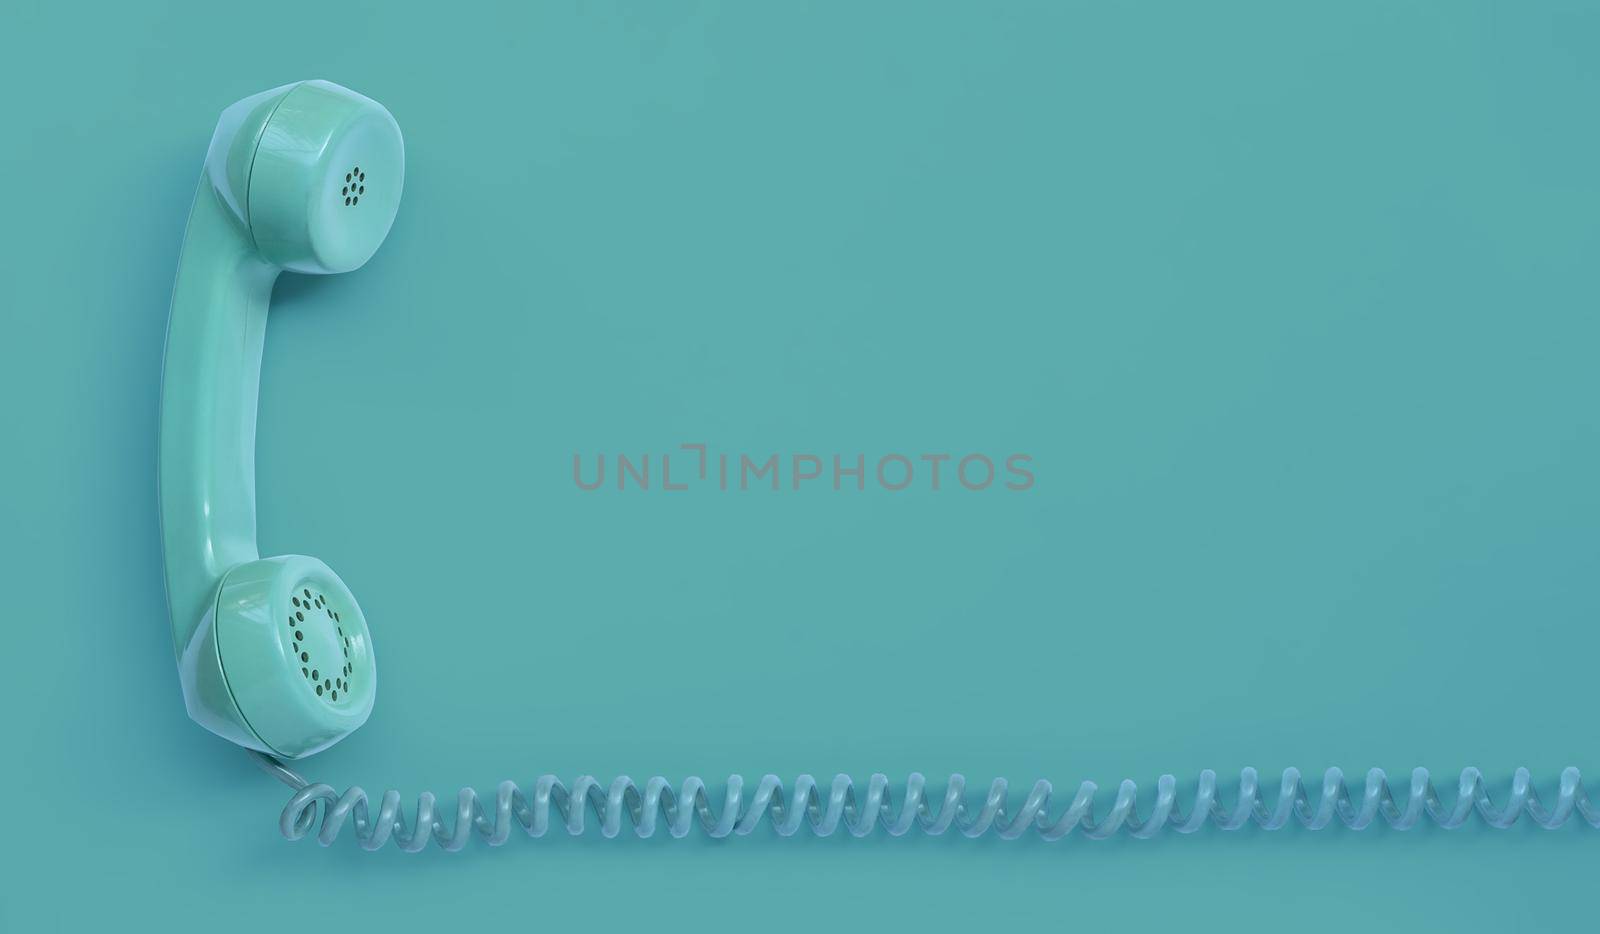 A blue-green vintage dial telephone handset. by maramade